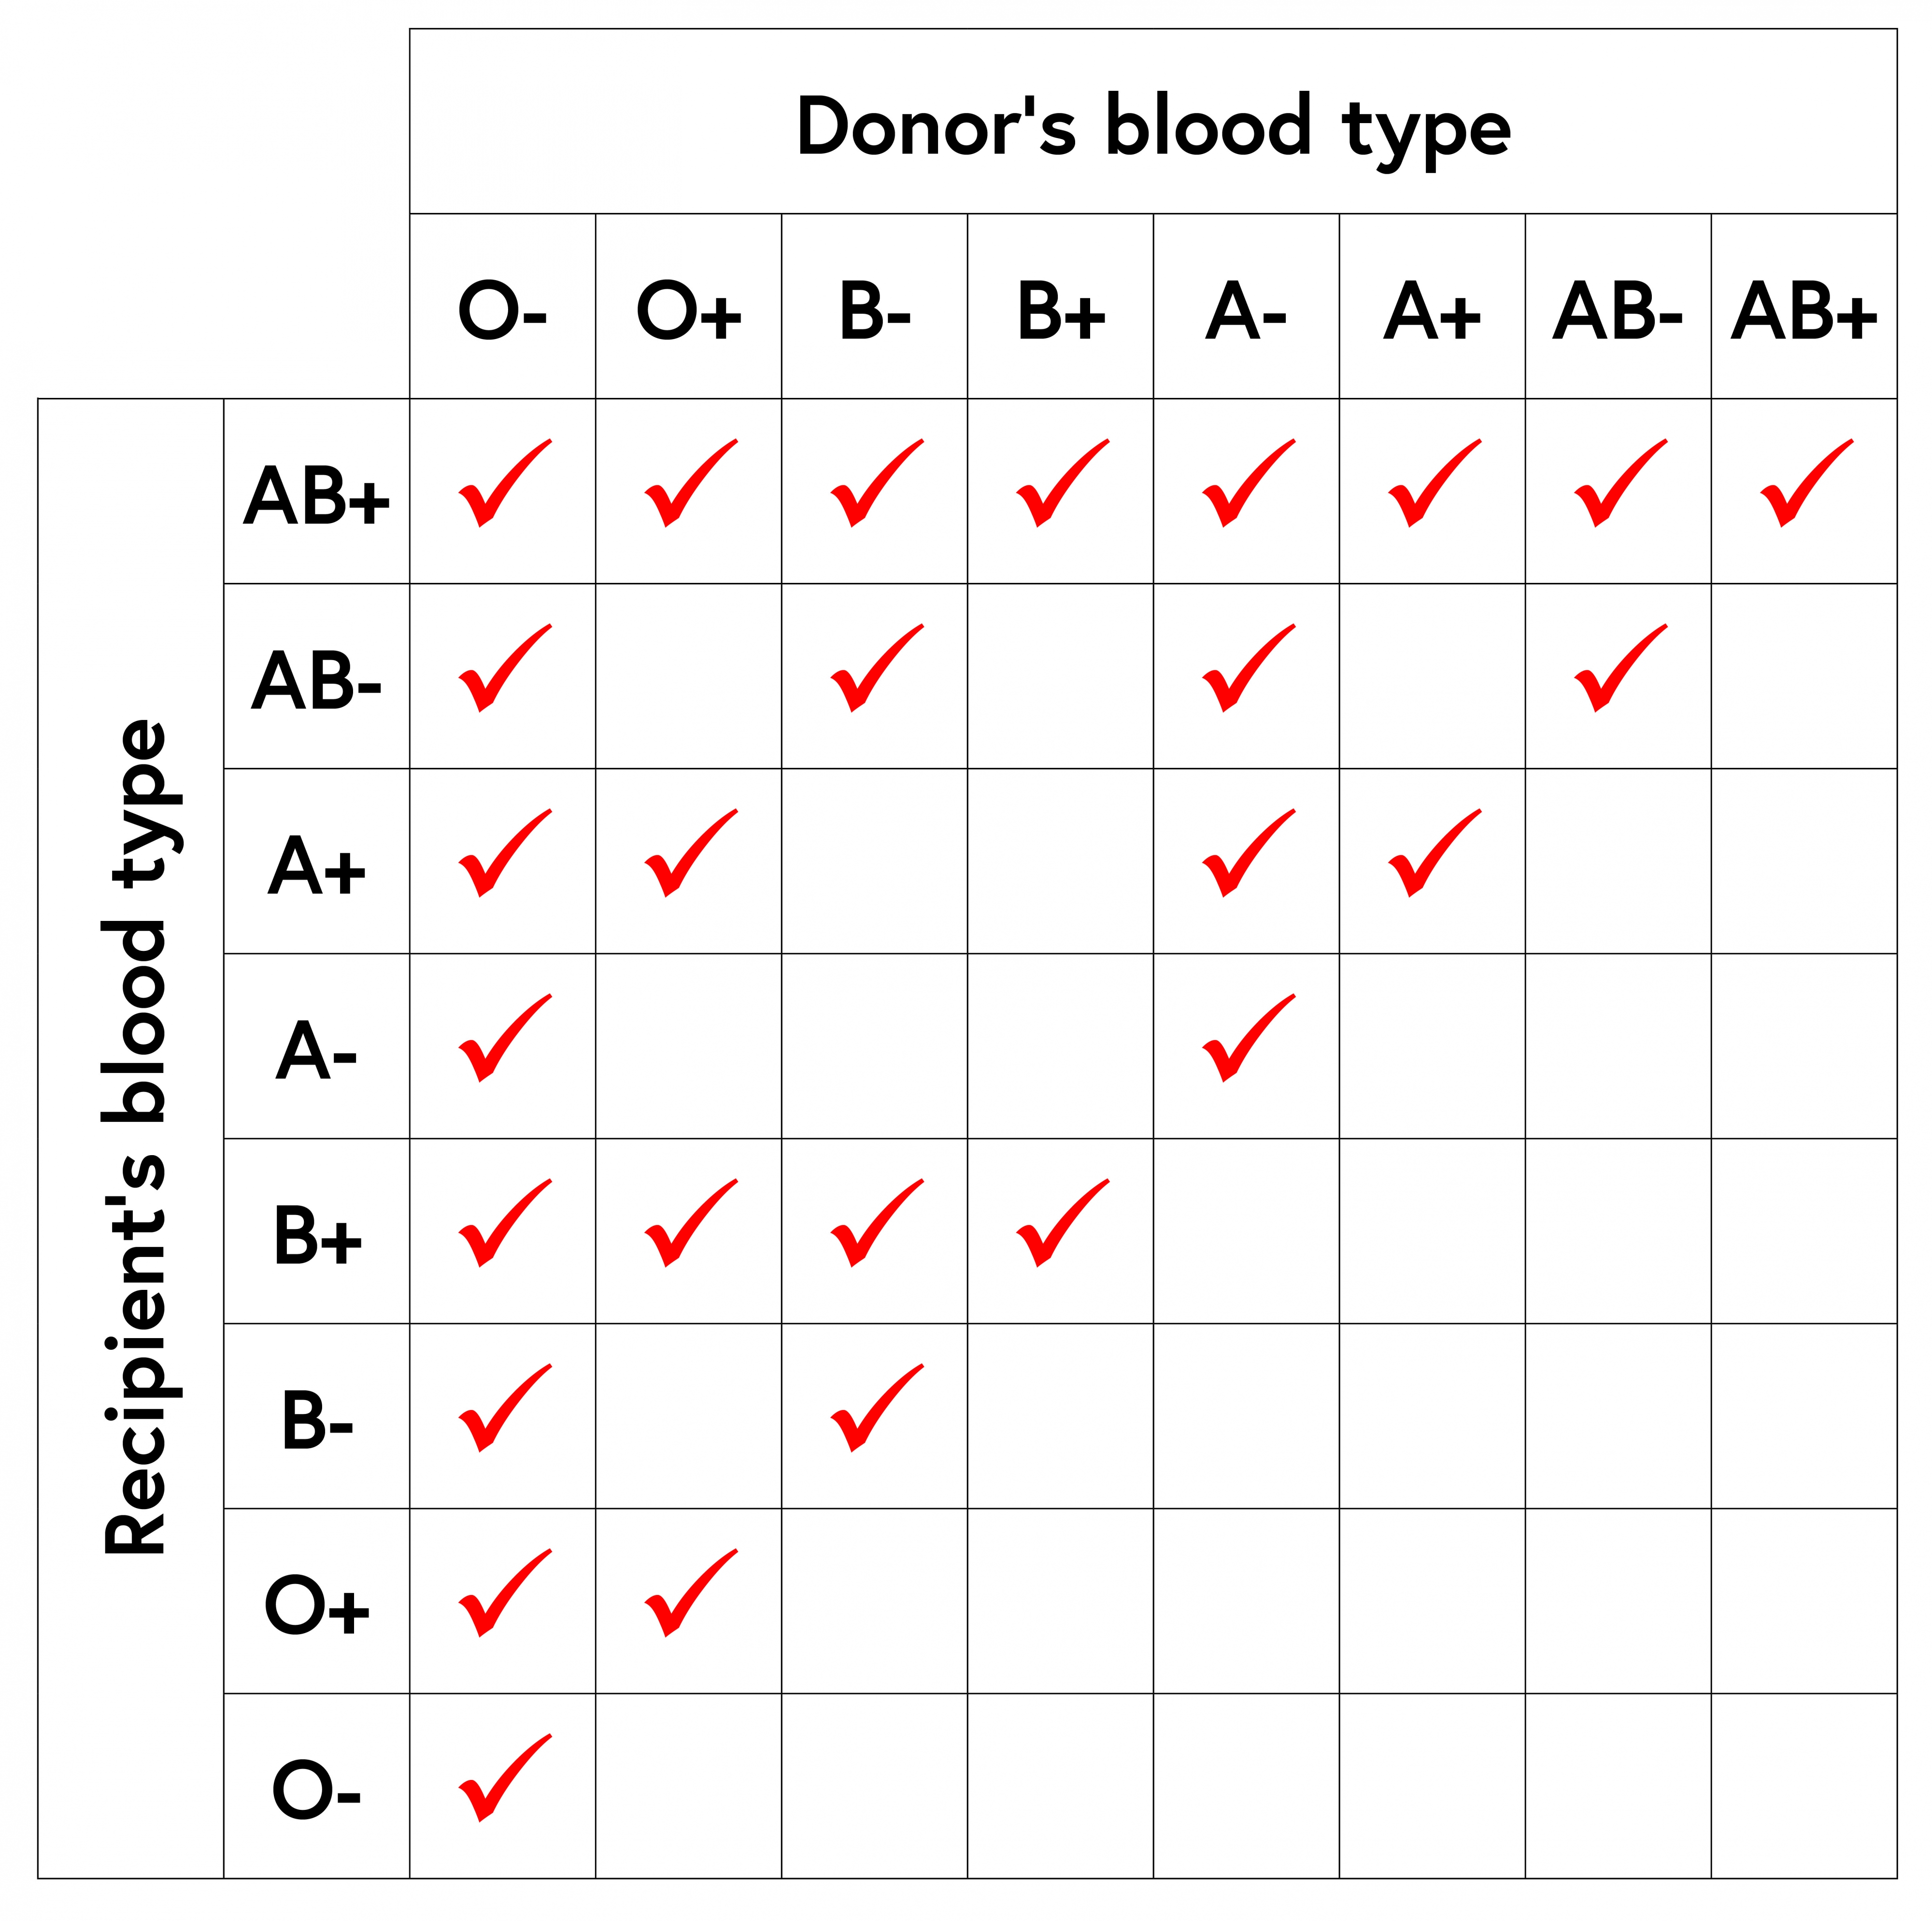 Chart showing the compatibility between donor and recipient of different red blood cell types